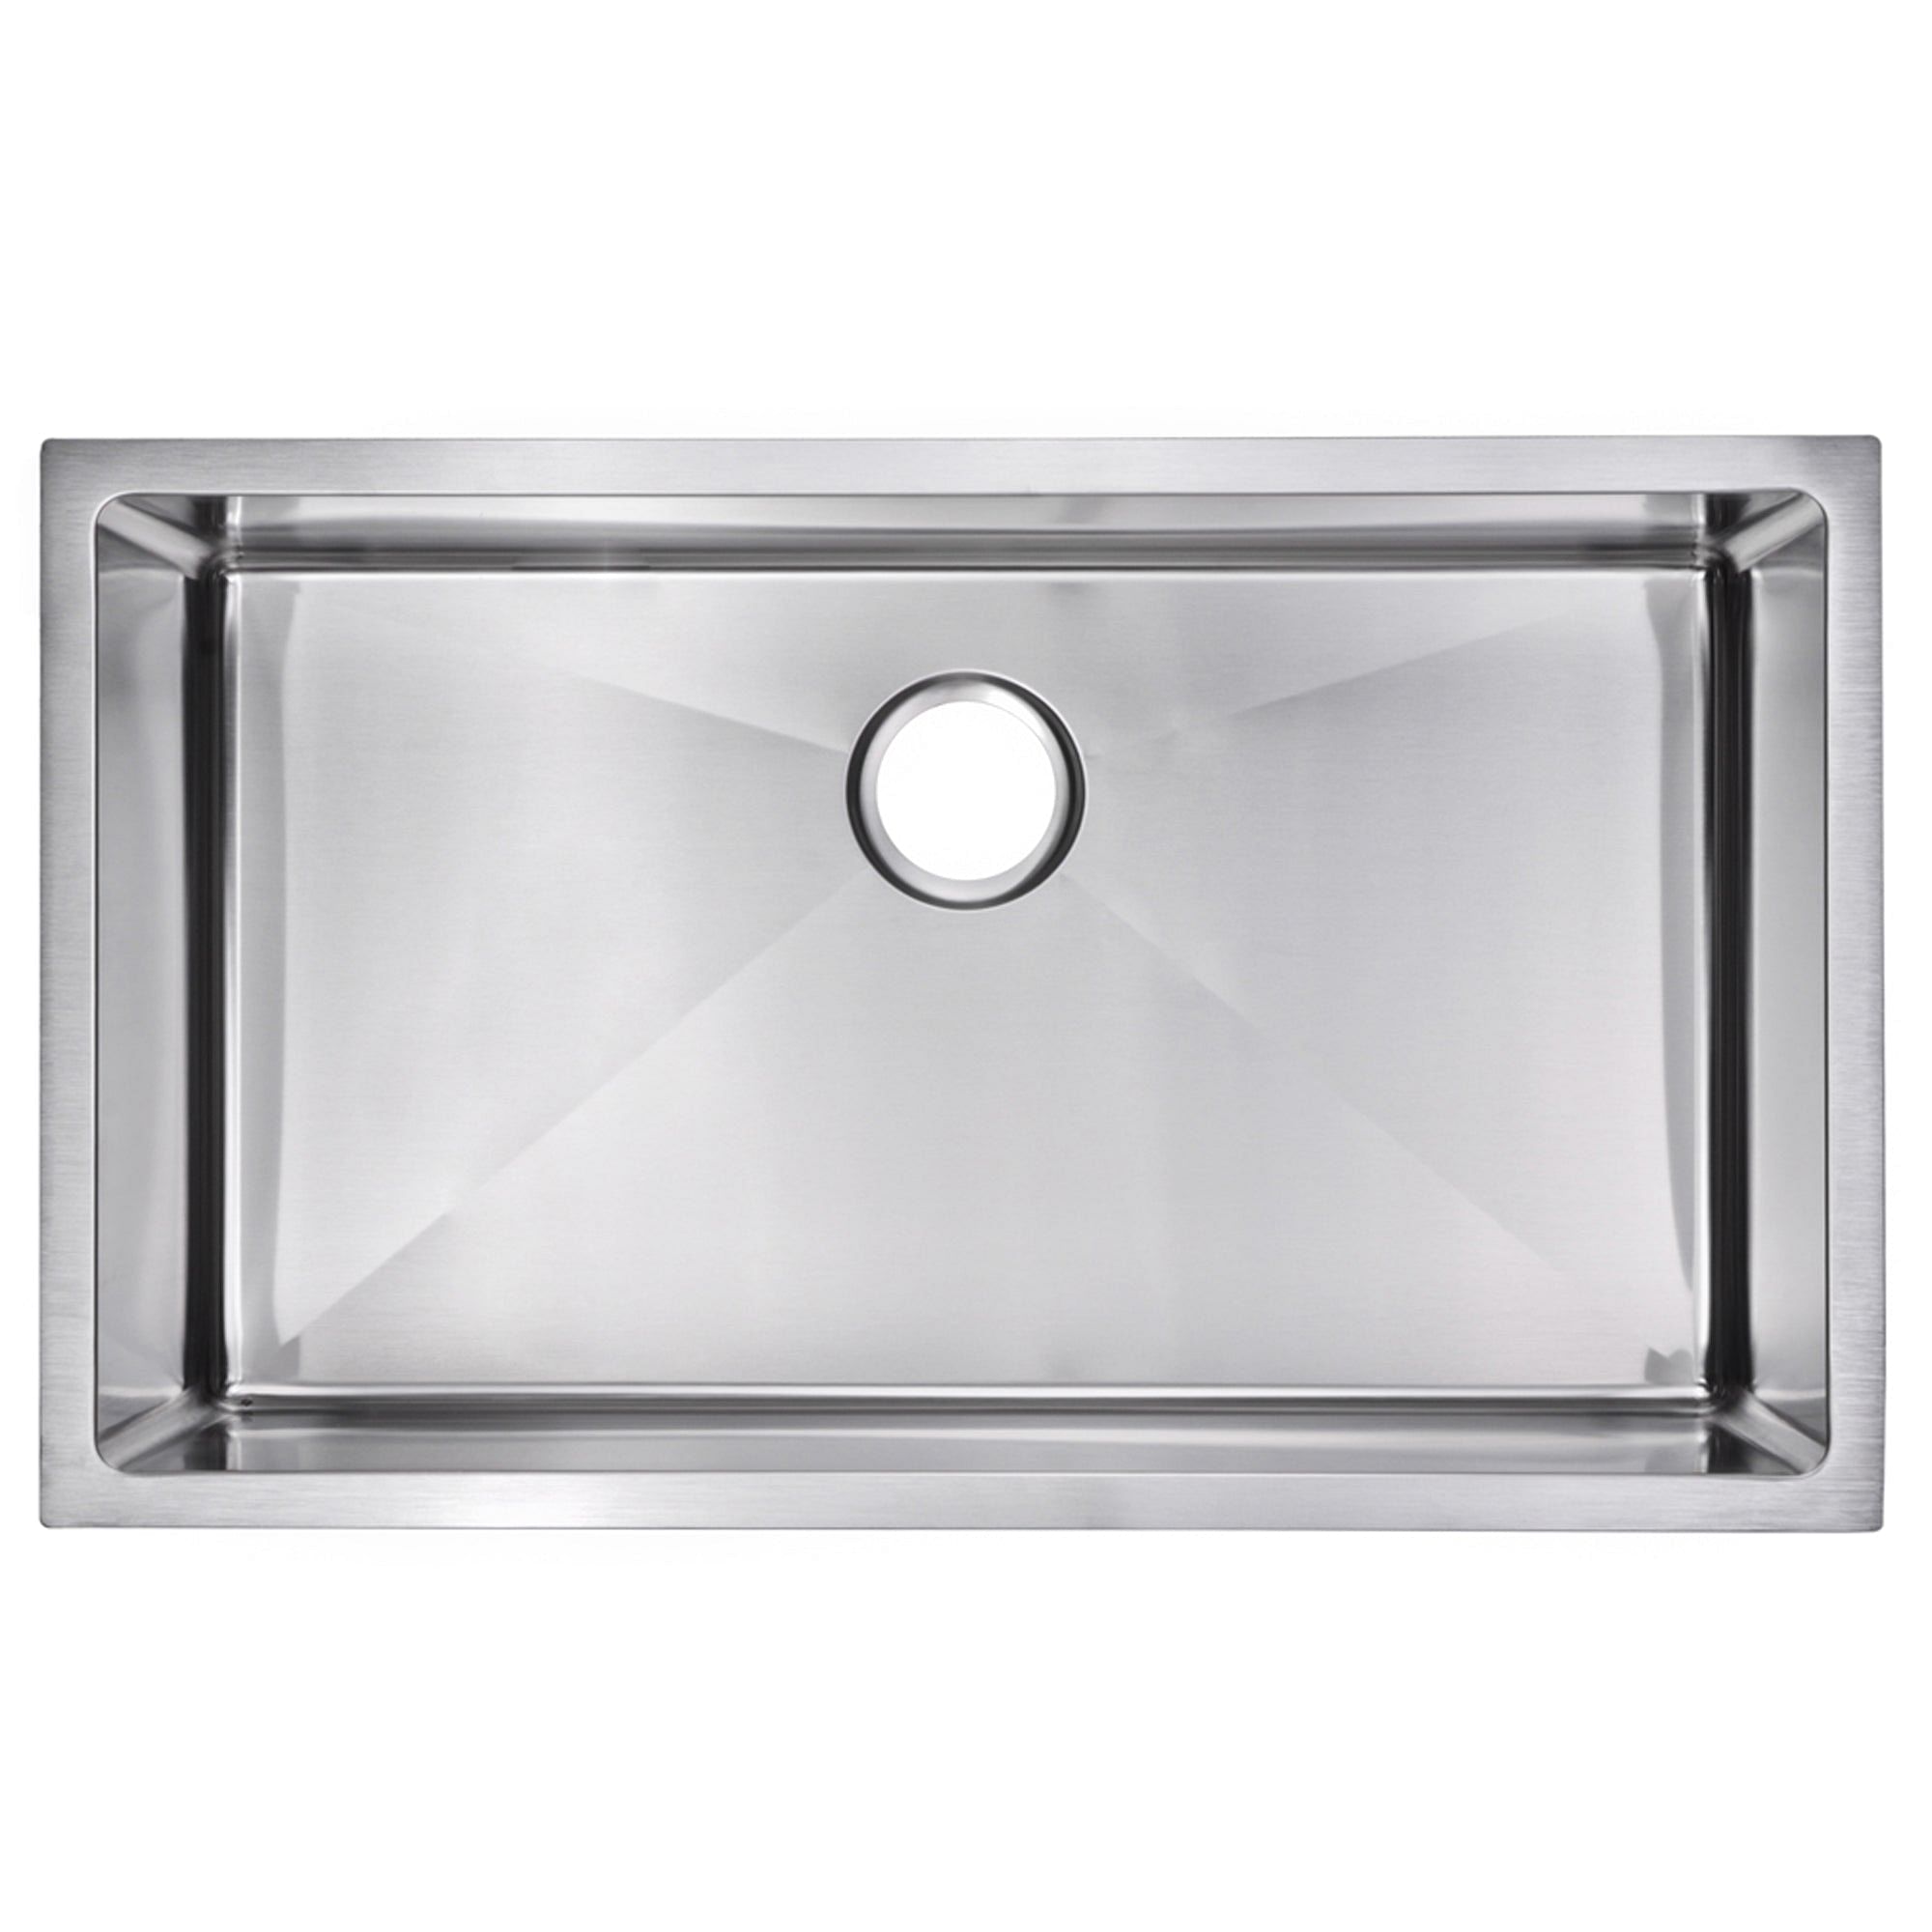 32 Inch X 19 Inch 15mm Corner Radius Single Bowl Stainless Steel Hand Made Undermount Kitchen Sink With Drain and Strainer